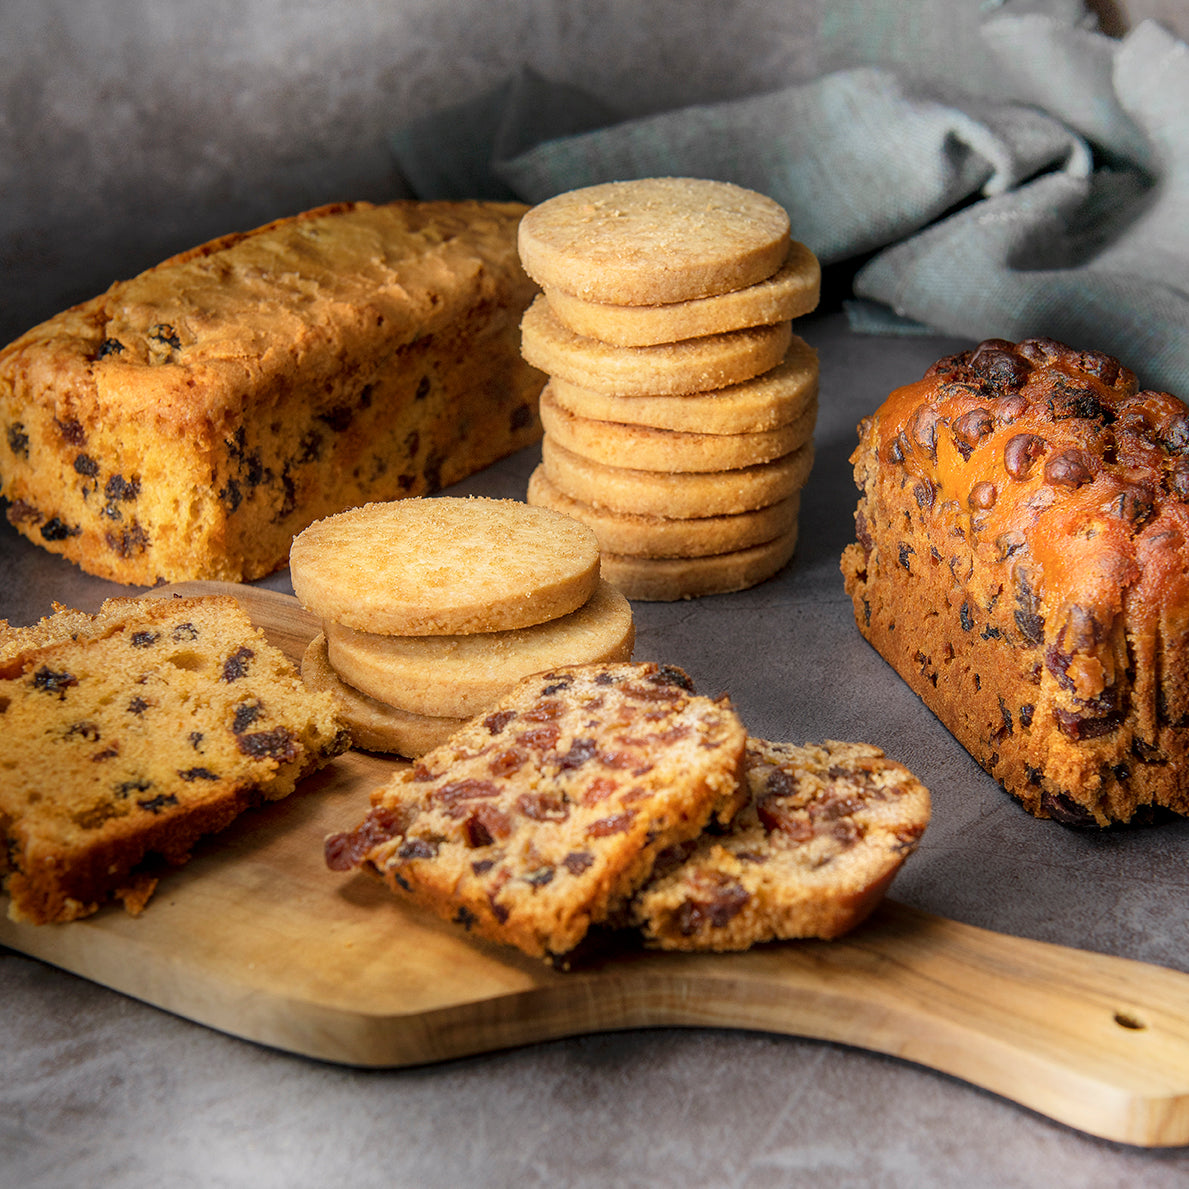 Bryson's Grisdale Selection includes Borrowdale Tea Bread, Cumbrian Fruit Cake and Butter Highlander Biscuits.